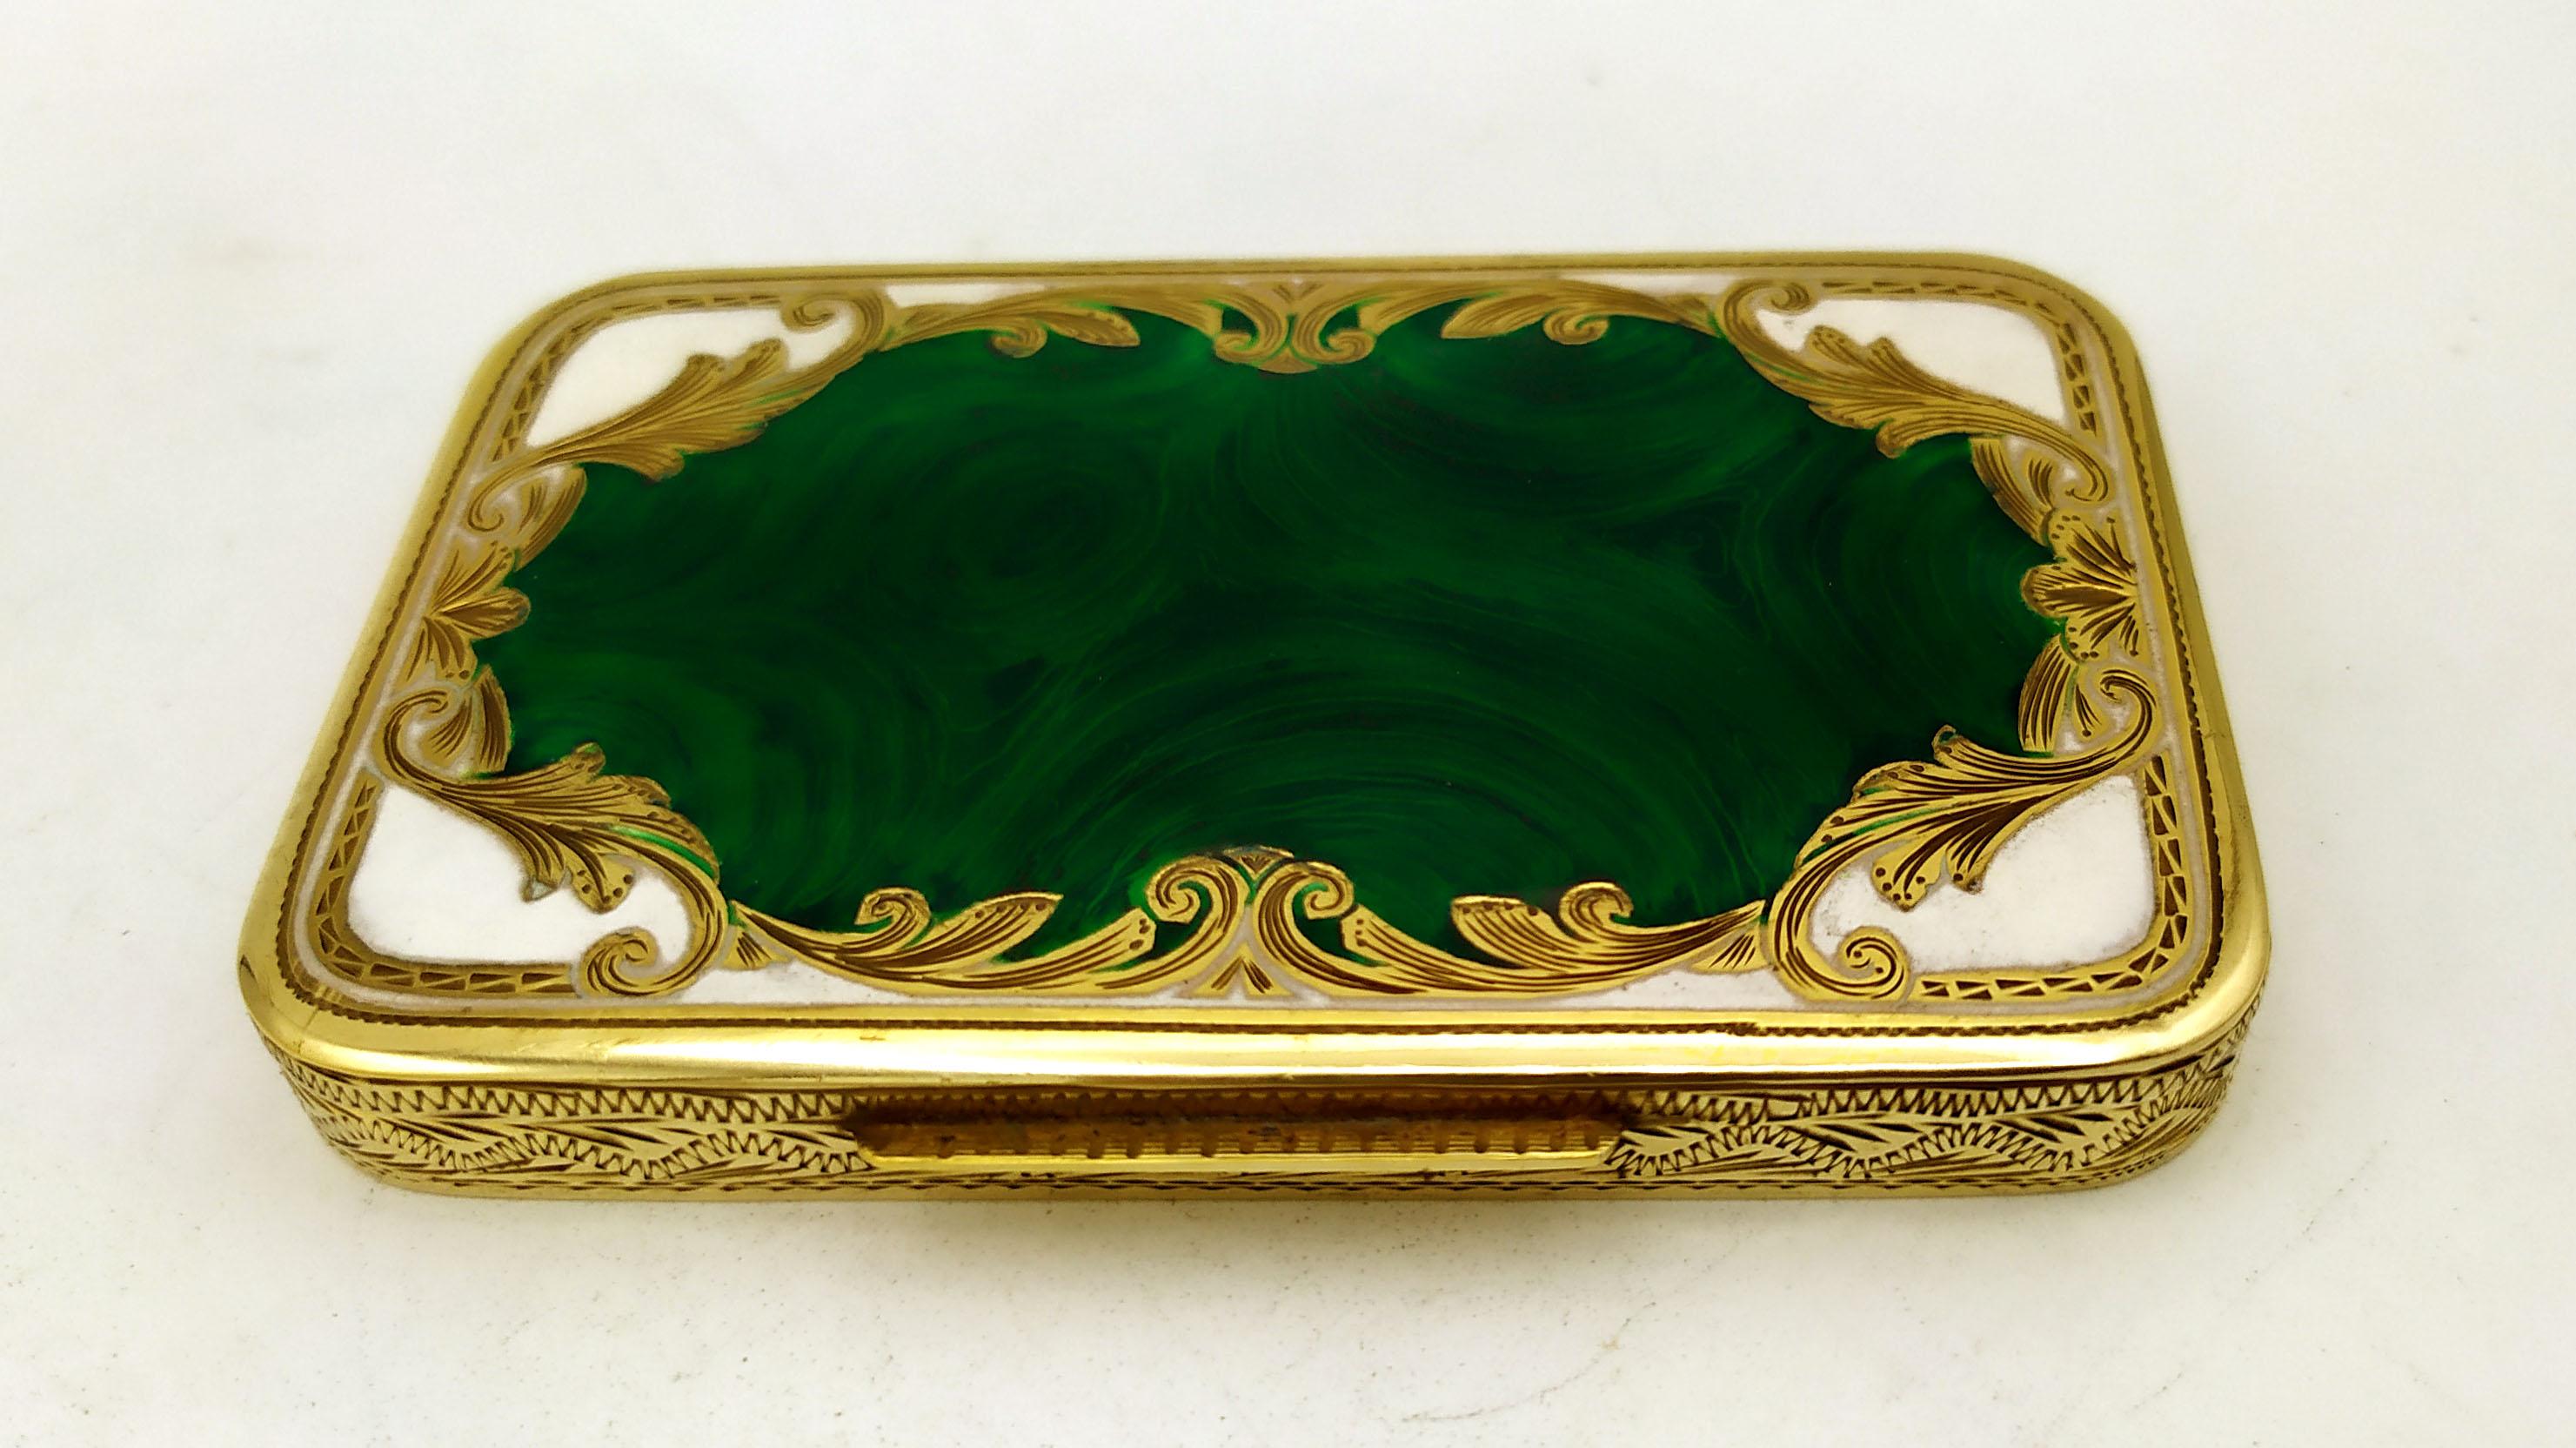 Cigarette Case rectangular  with rounded corners in 925/1000 sterling silver gold plated with Baroque style hand engraving and hand-painted fired enamel such as malachite stone. Measurement cm. 5.8 x 9 x 1.2 Weight gr. 125. Made in 1977 in Florence